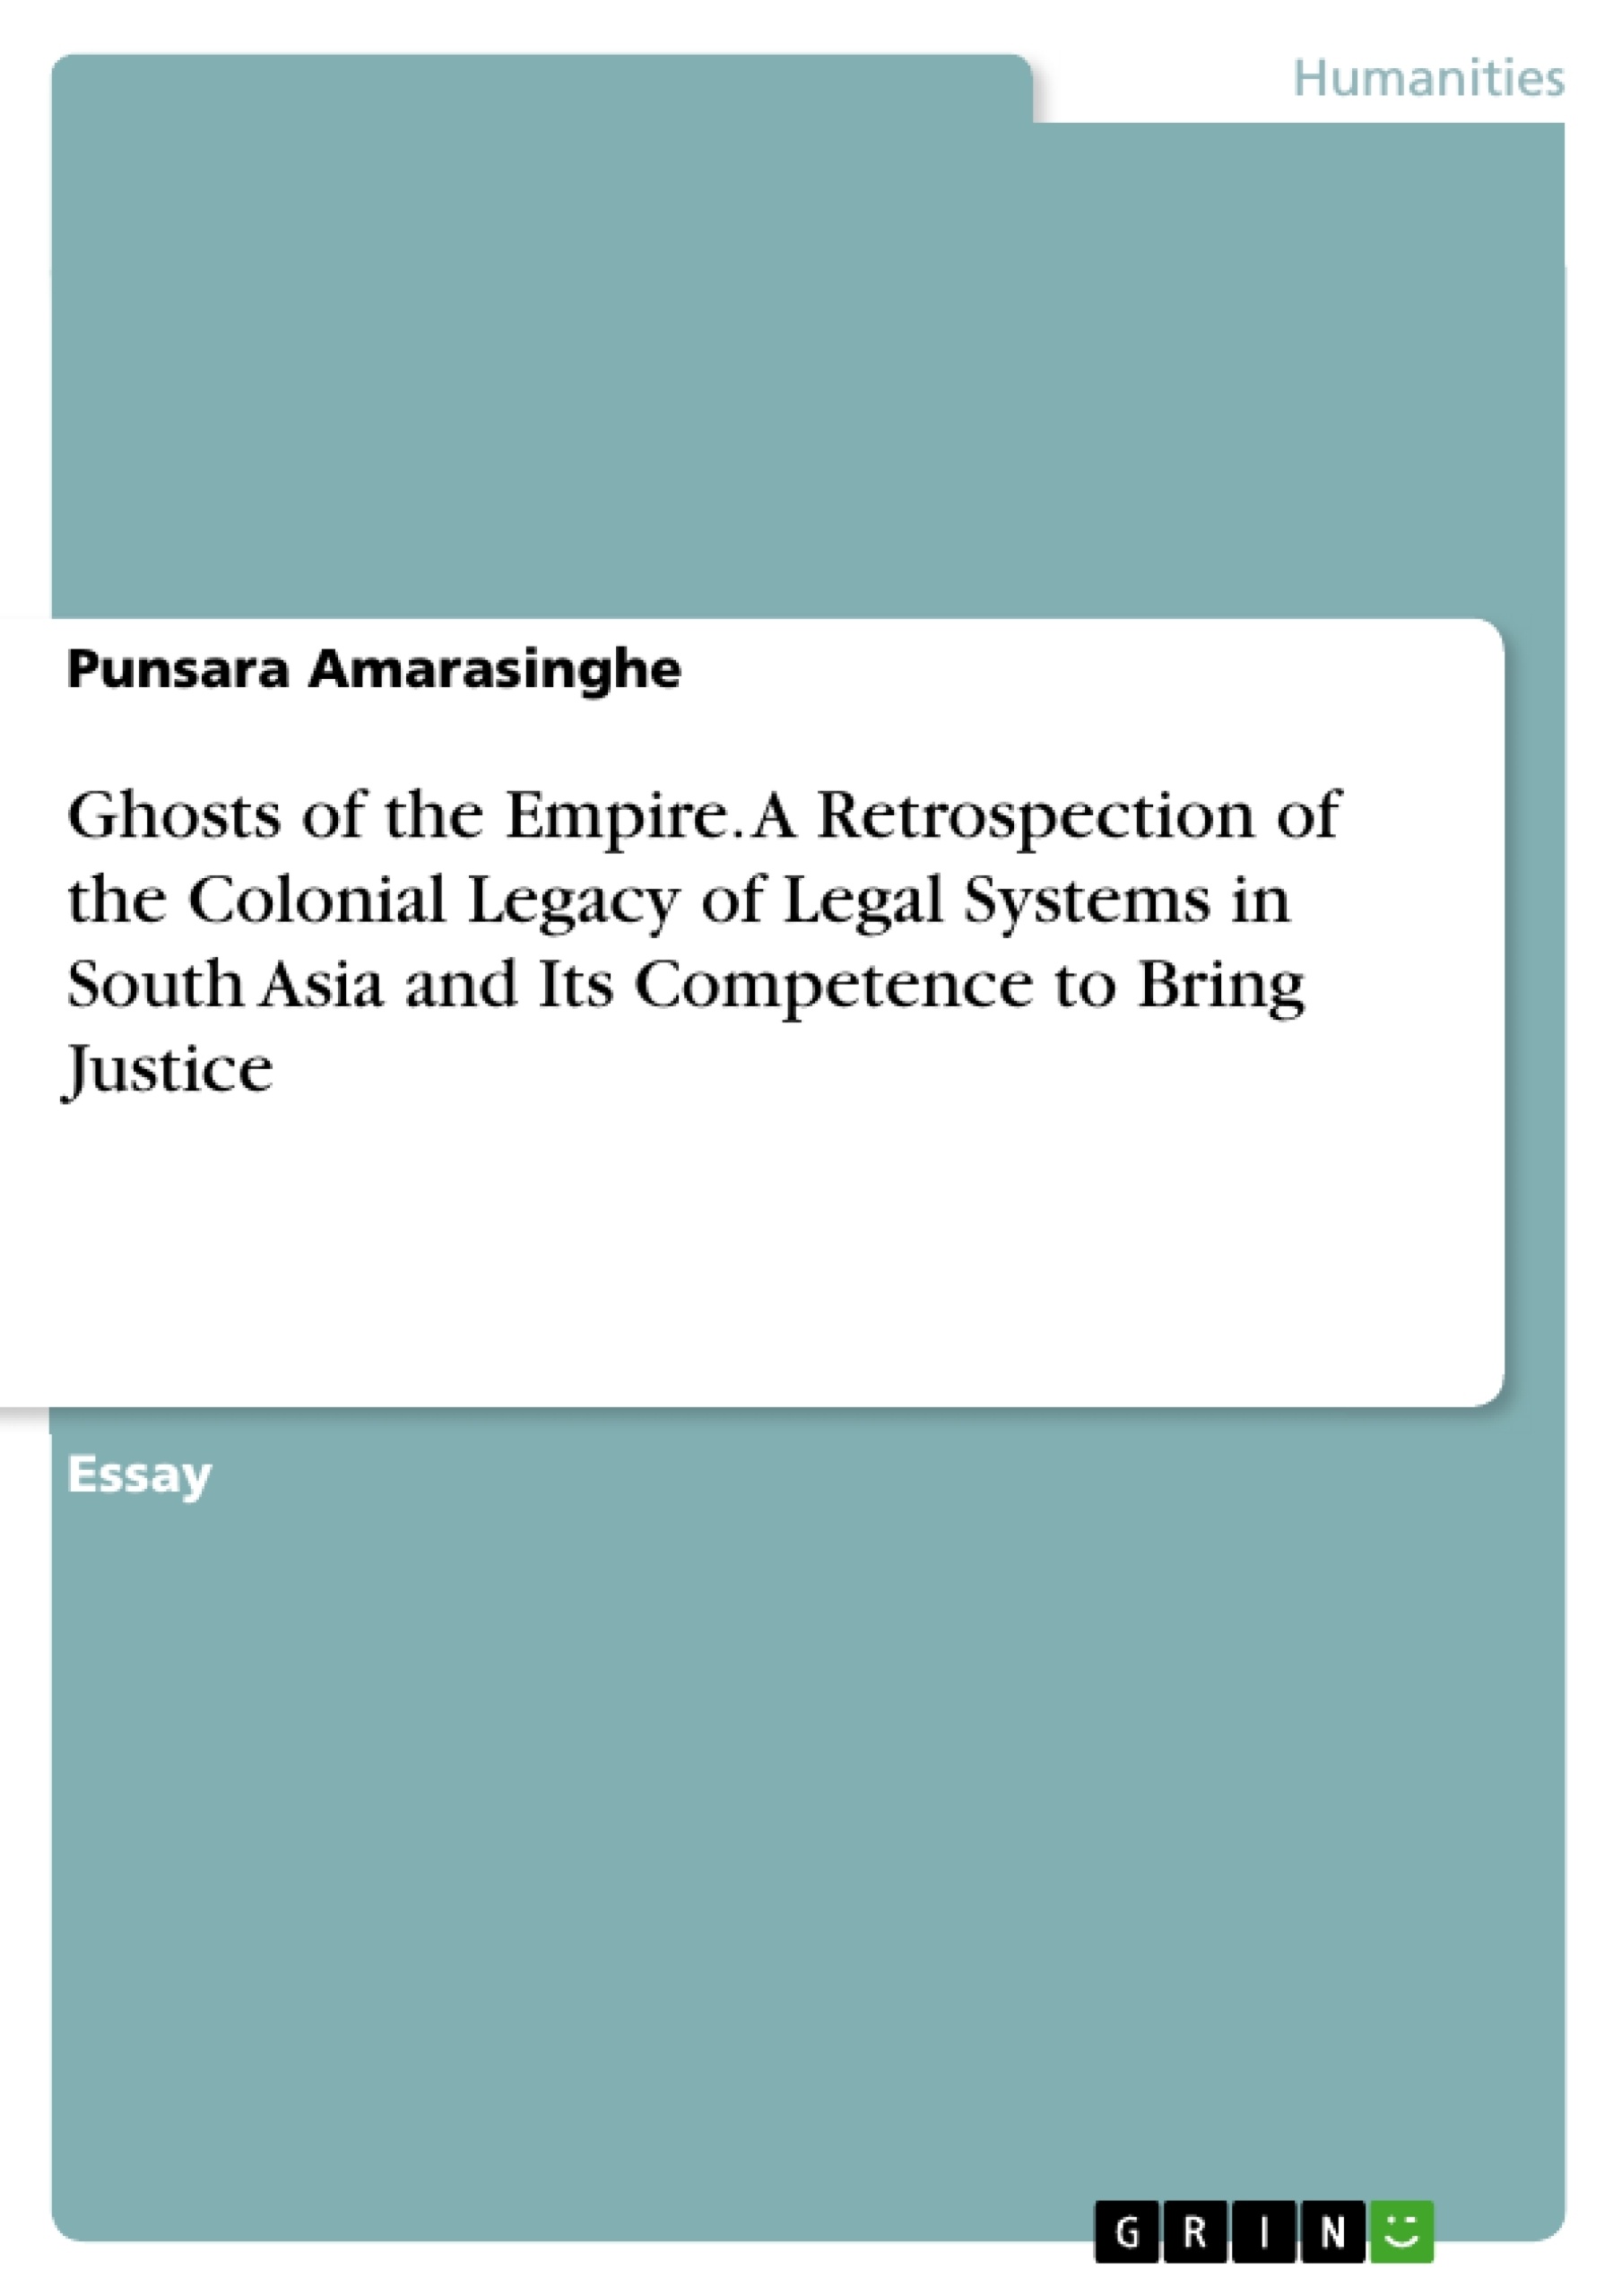 Title: Ghosts of the Empire. A Retrospection of the Colonial Legacy of Legal Systems in South Asia and Its Competence to Bring Justice